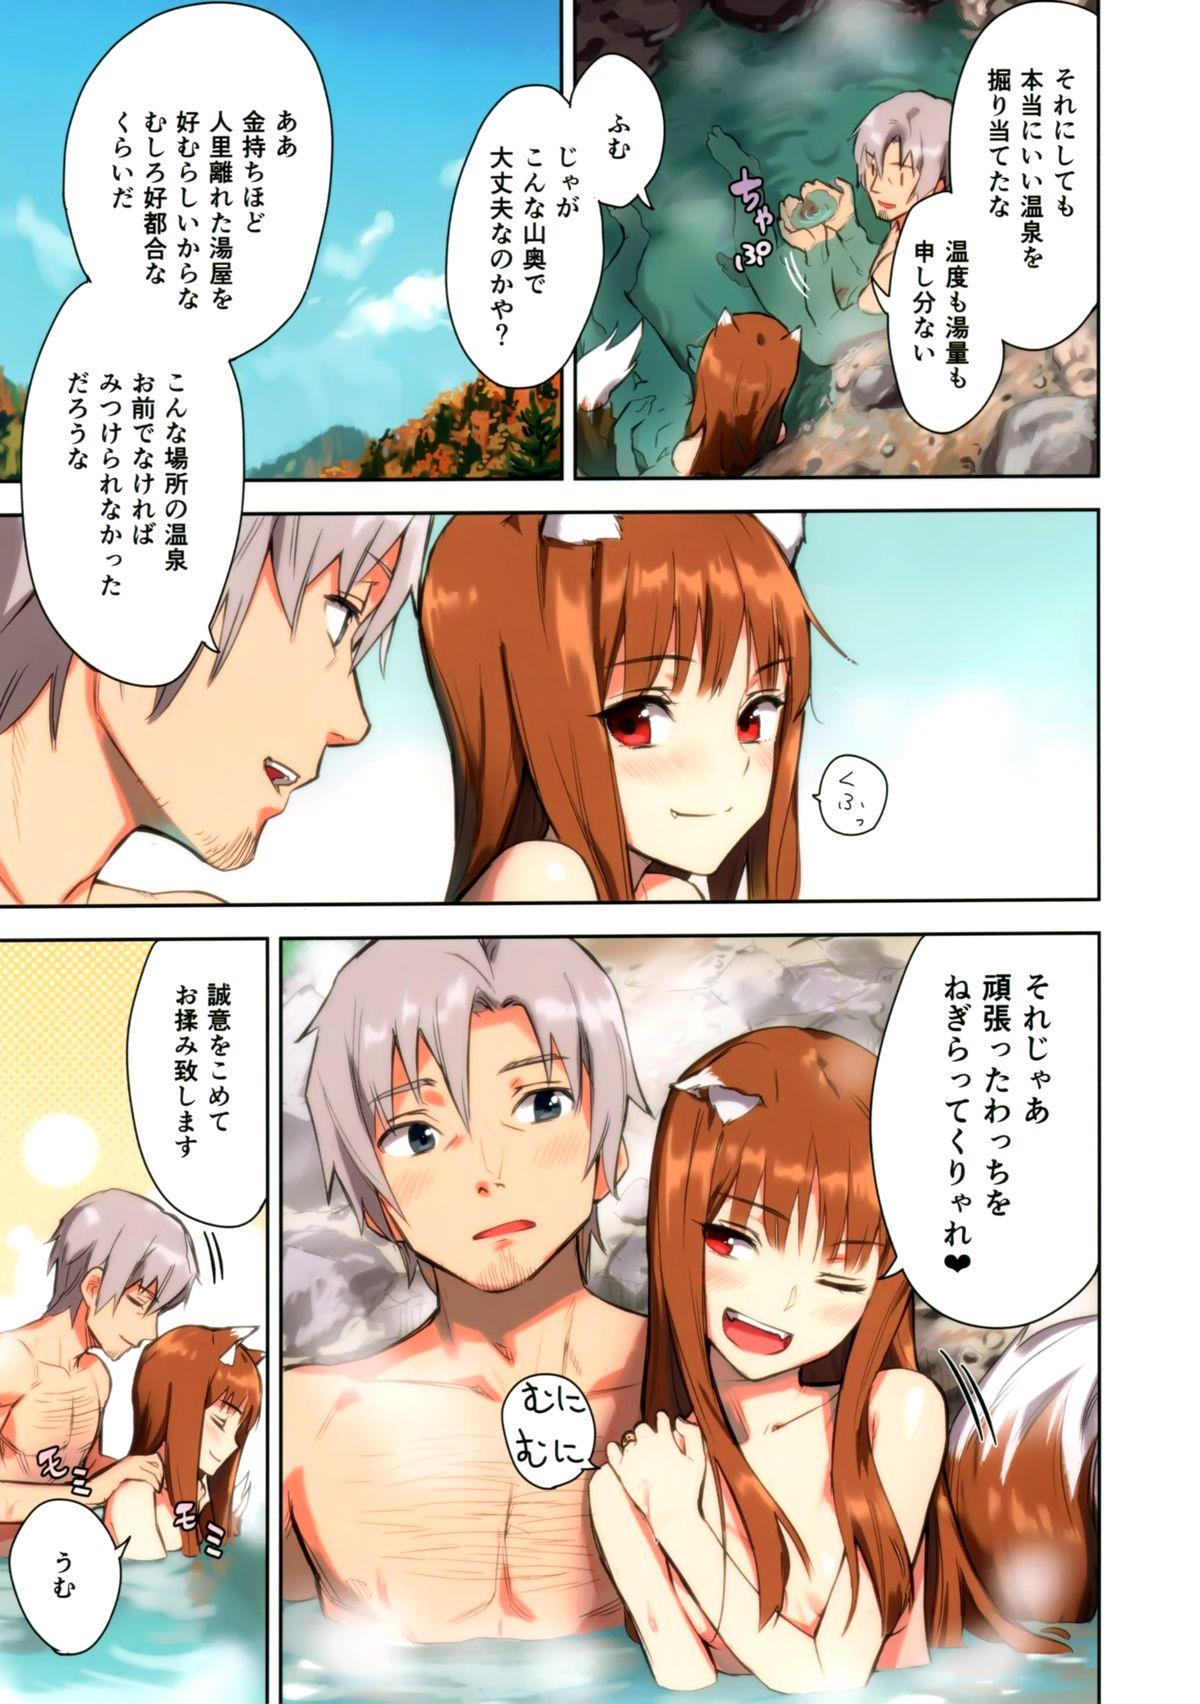 Riding Wacchi to Nyohhira Bon FULL COLOR - Spice and wolf Parties - Page 8